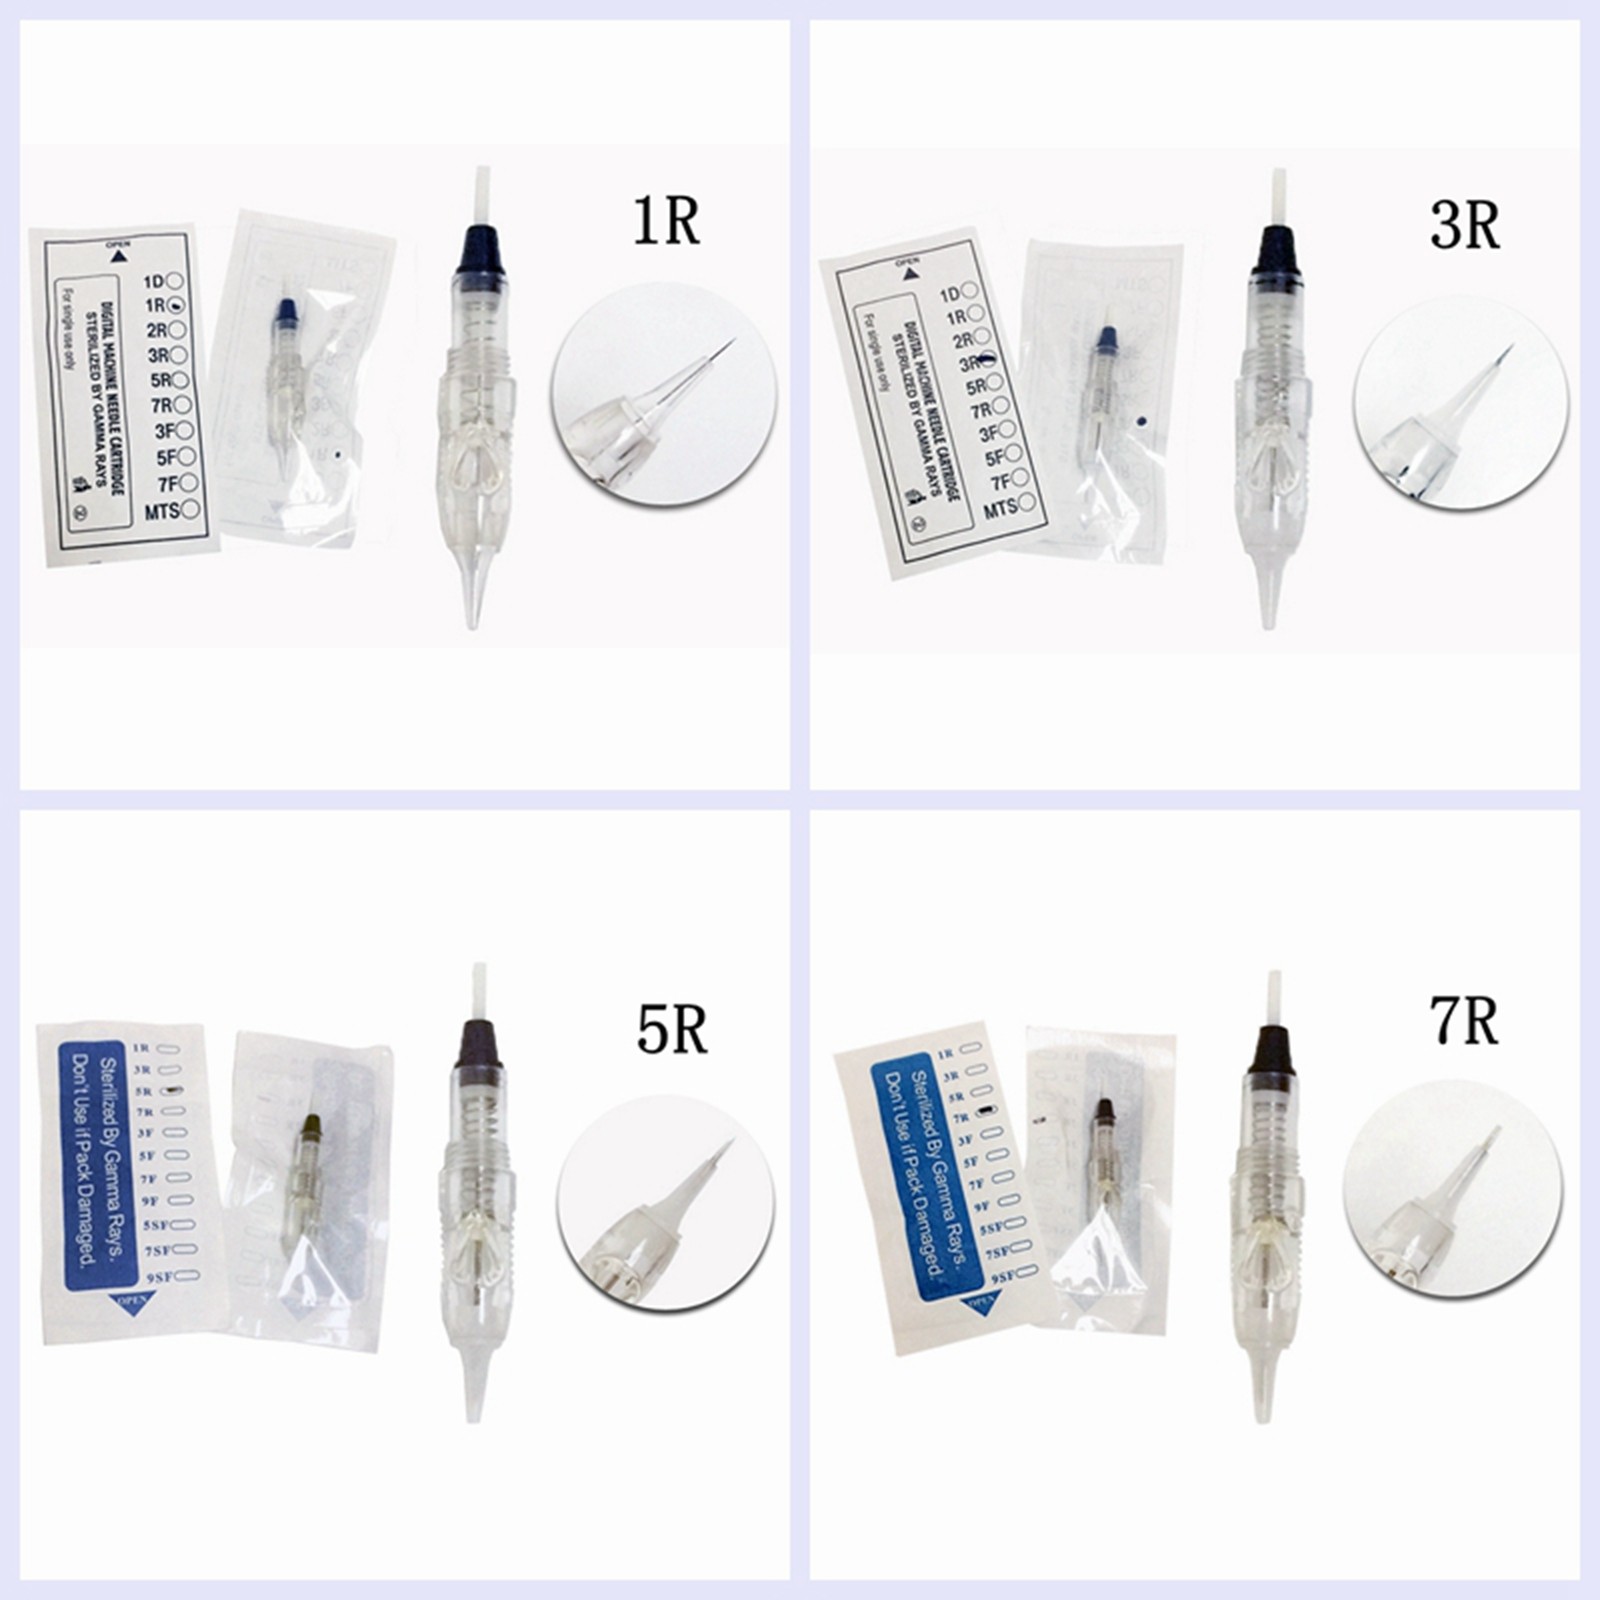 BoLin-Find Semi Disposable Tattoo Needle Cartridges From Bolin Cosmetic-3